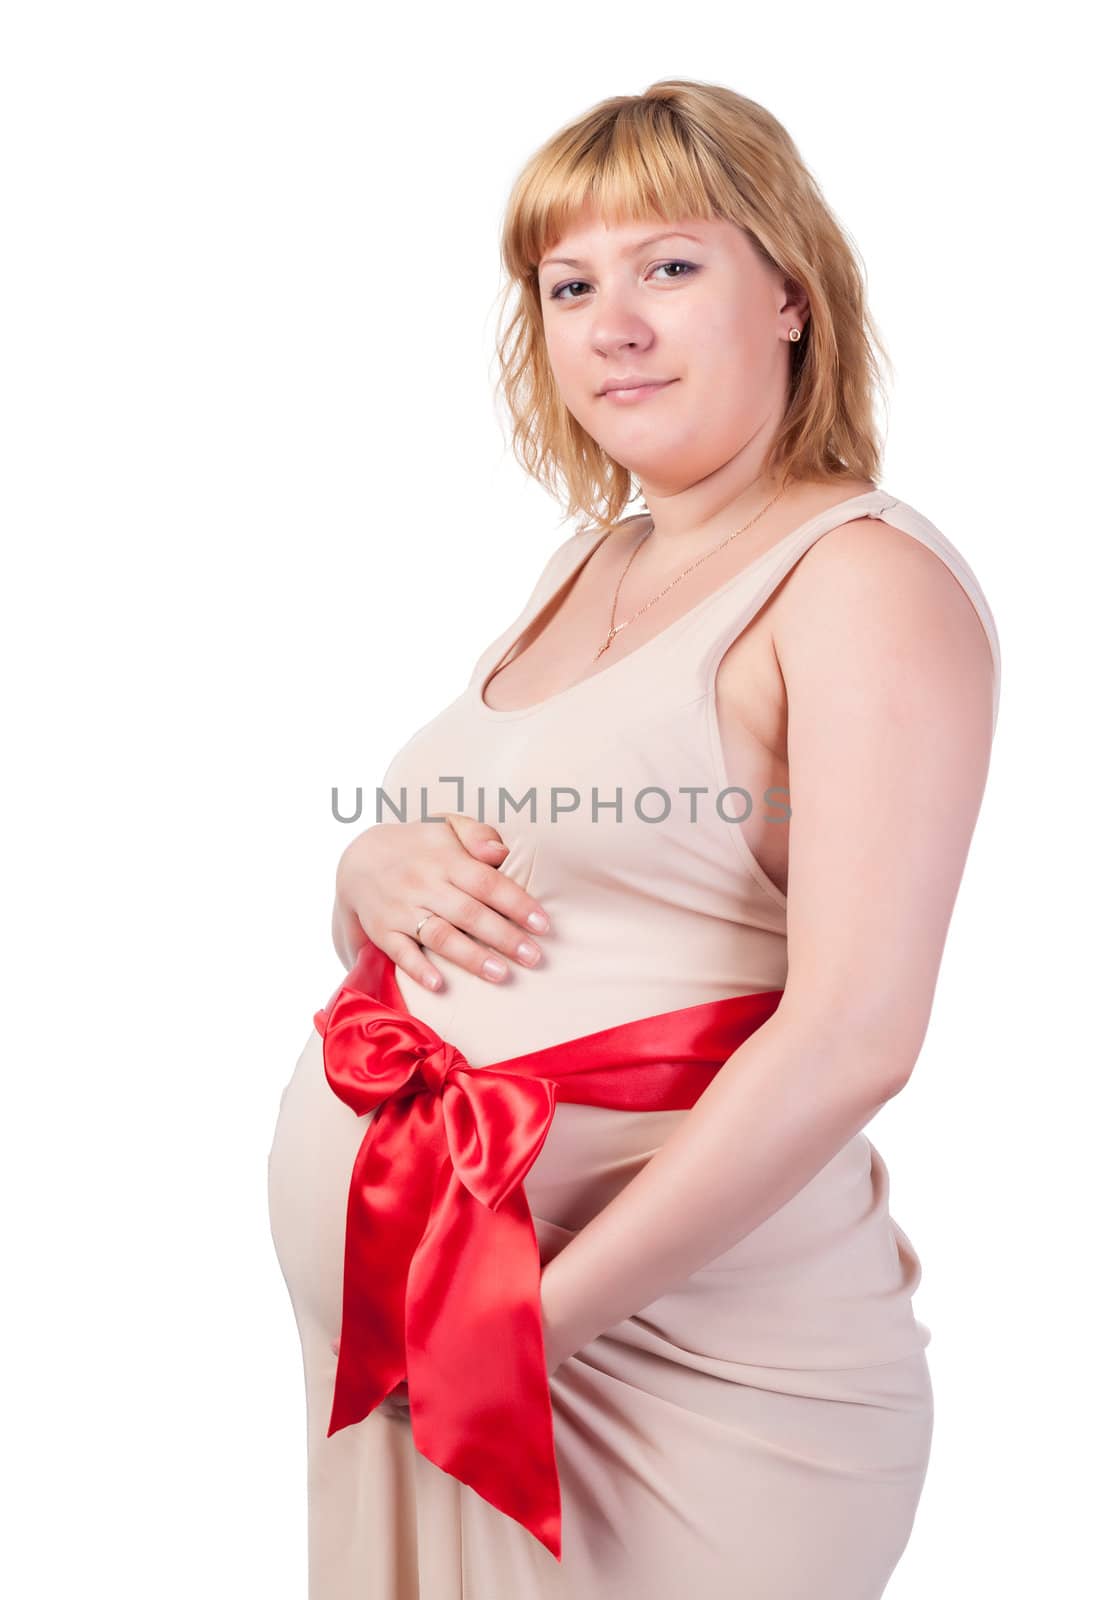 Pregnant Woman Caressing her Belly, over white background